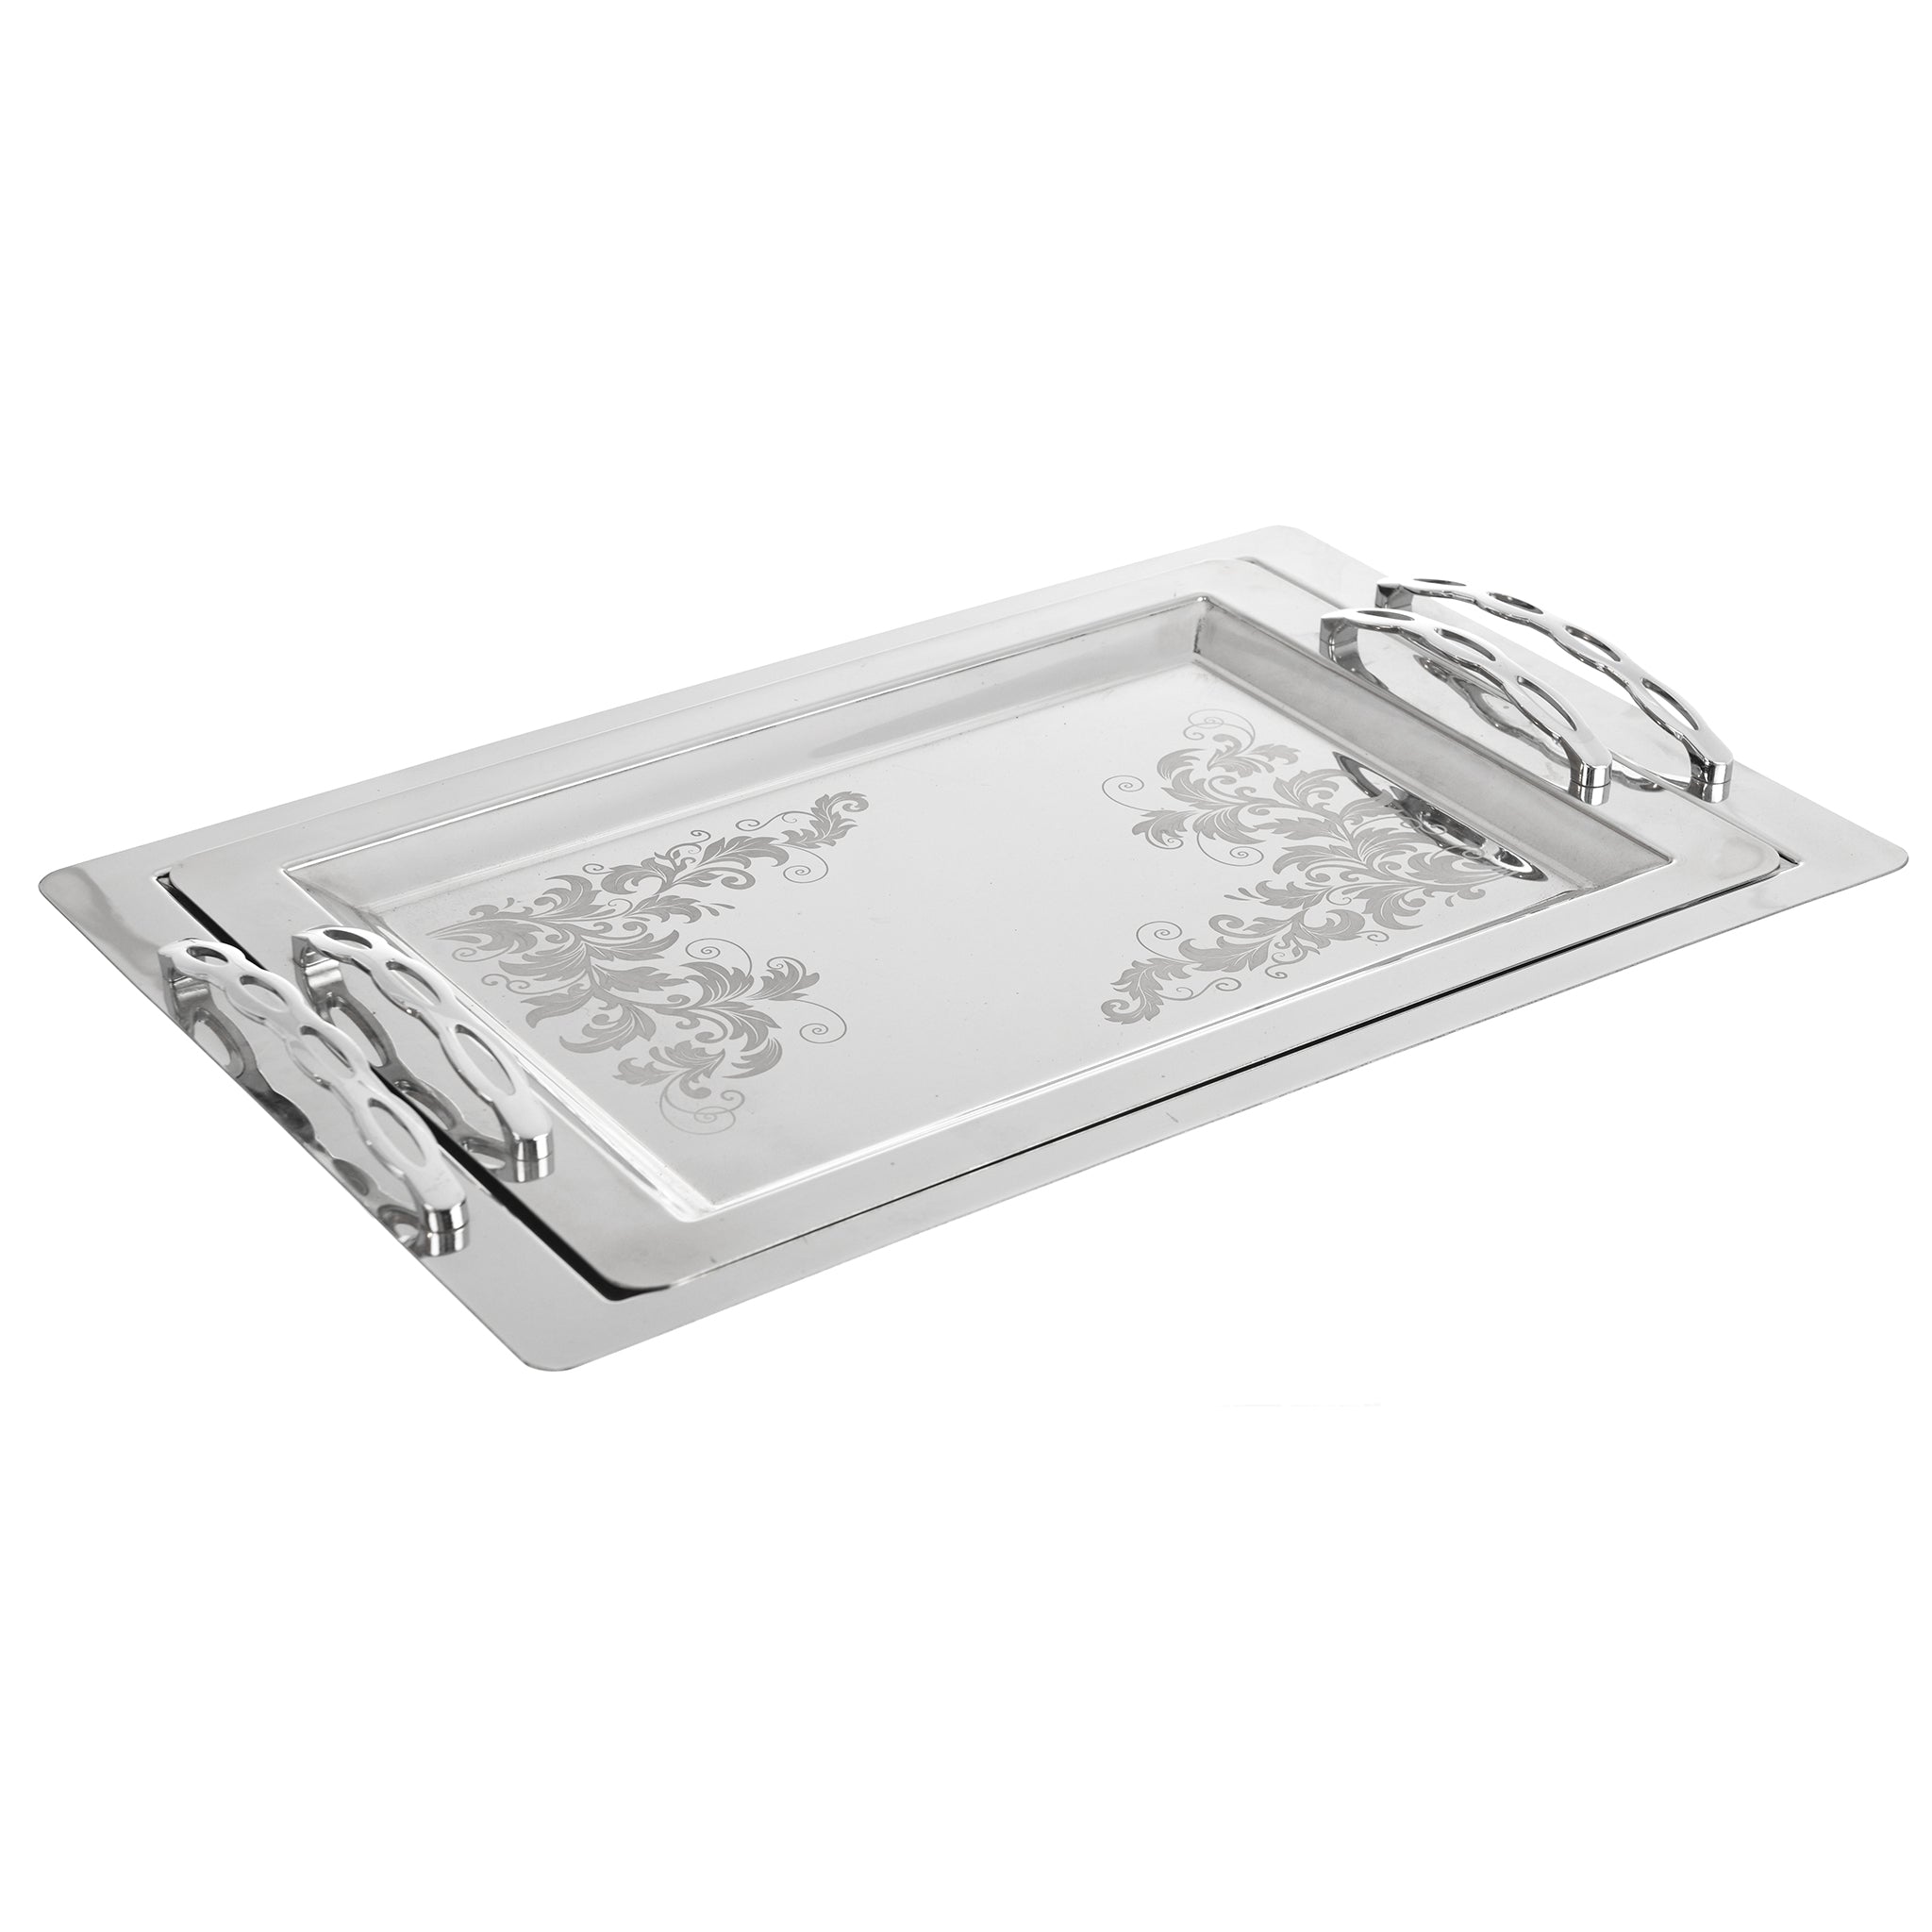 Goldon - Rectangular Tray Set With Handles 2 Pieces - Stainless Steel - 80001530